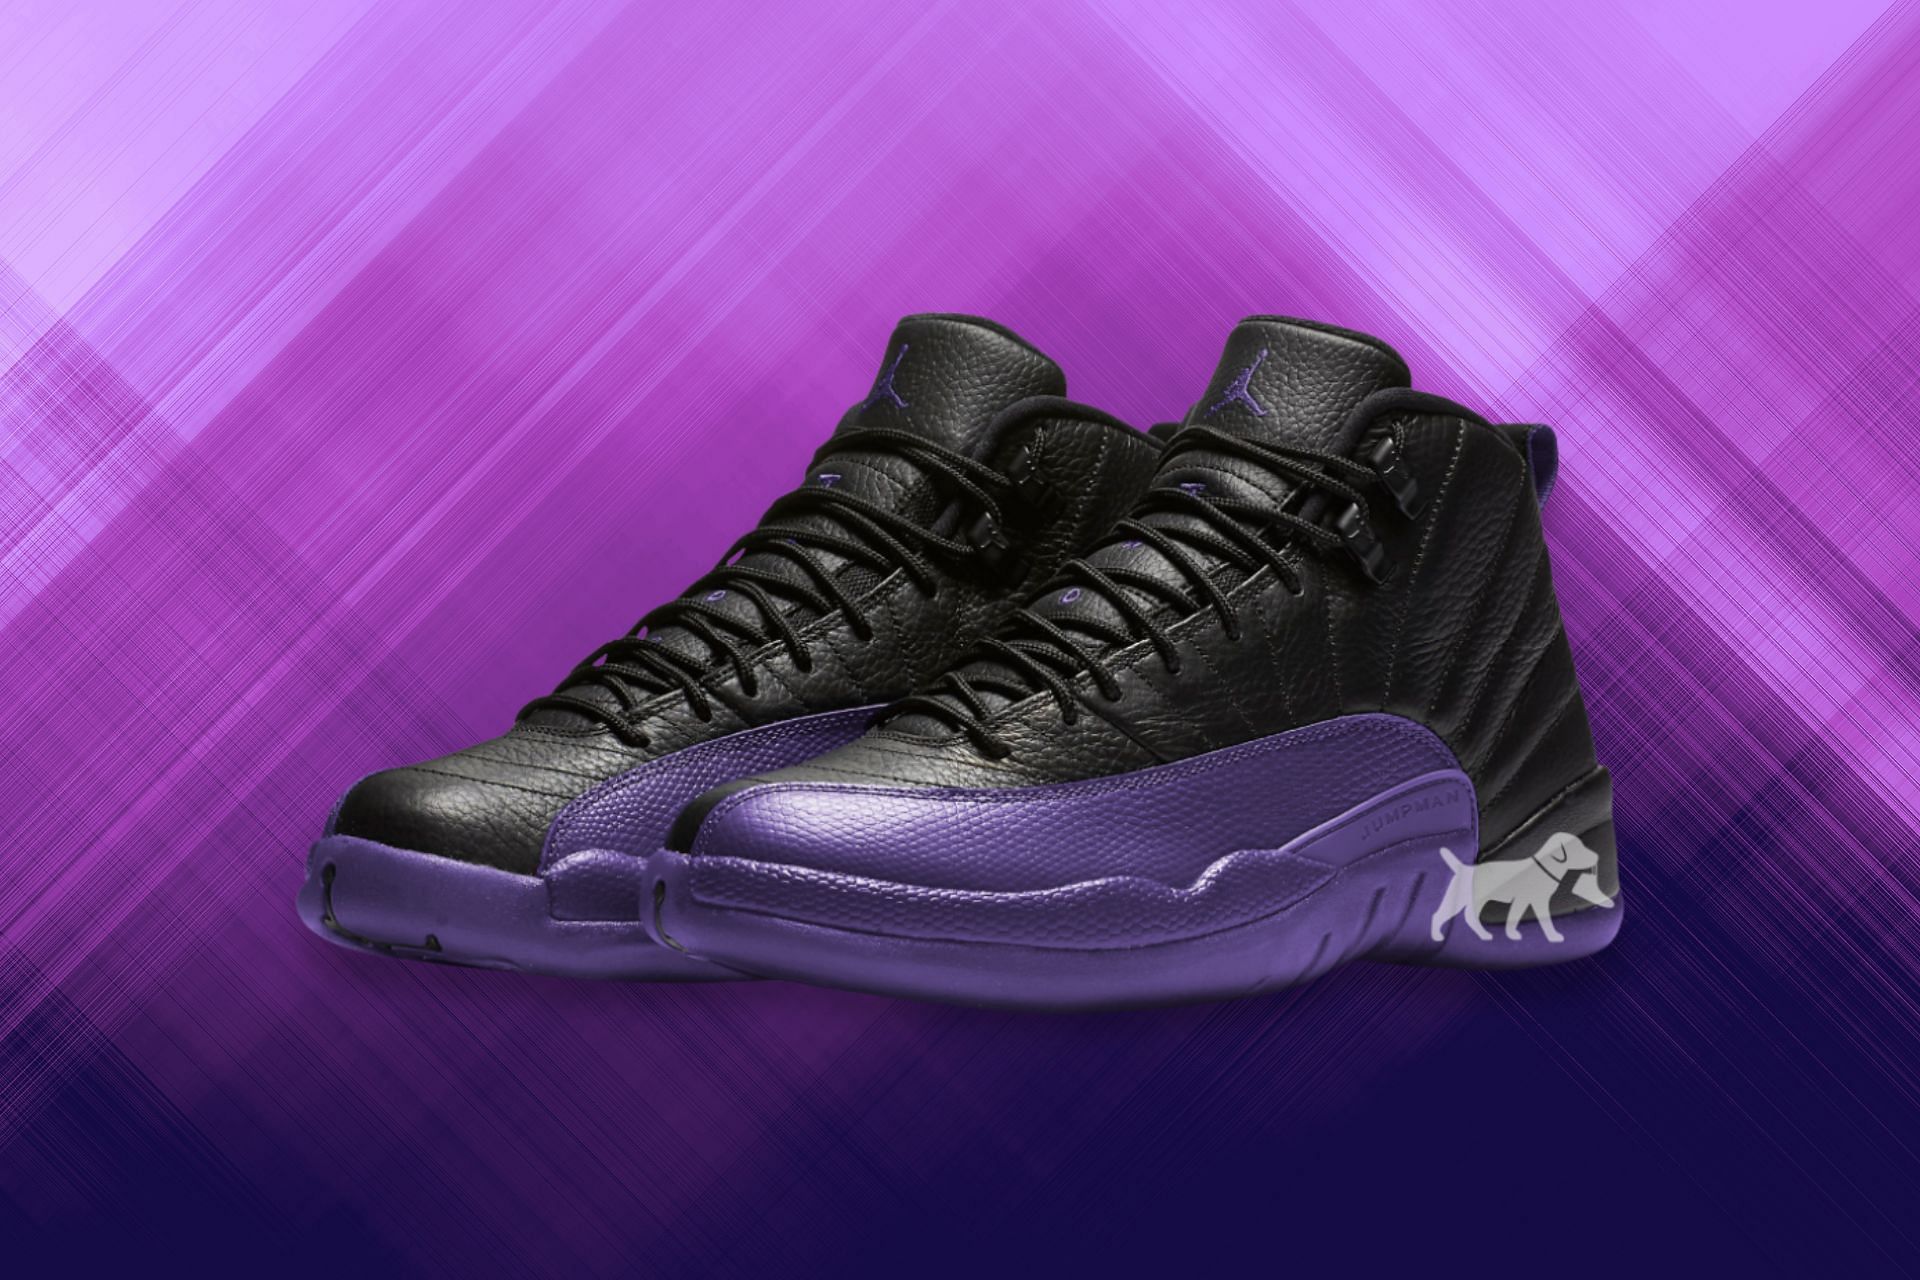 Purple 12s Release Date | vlr.eng.br